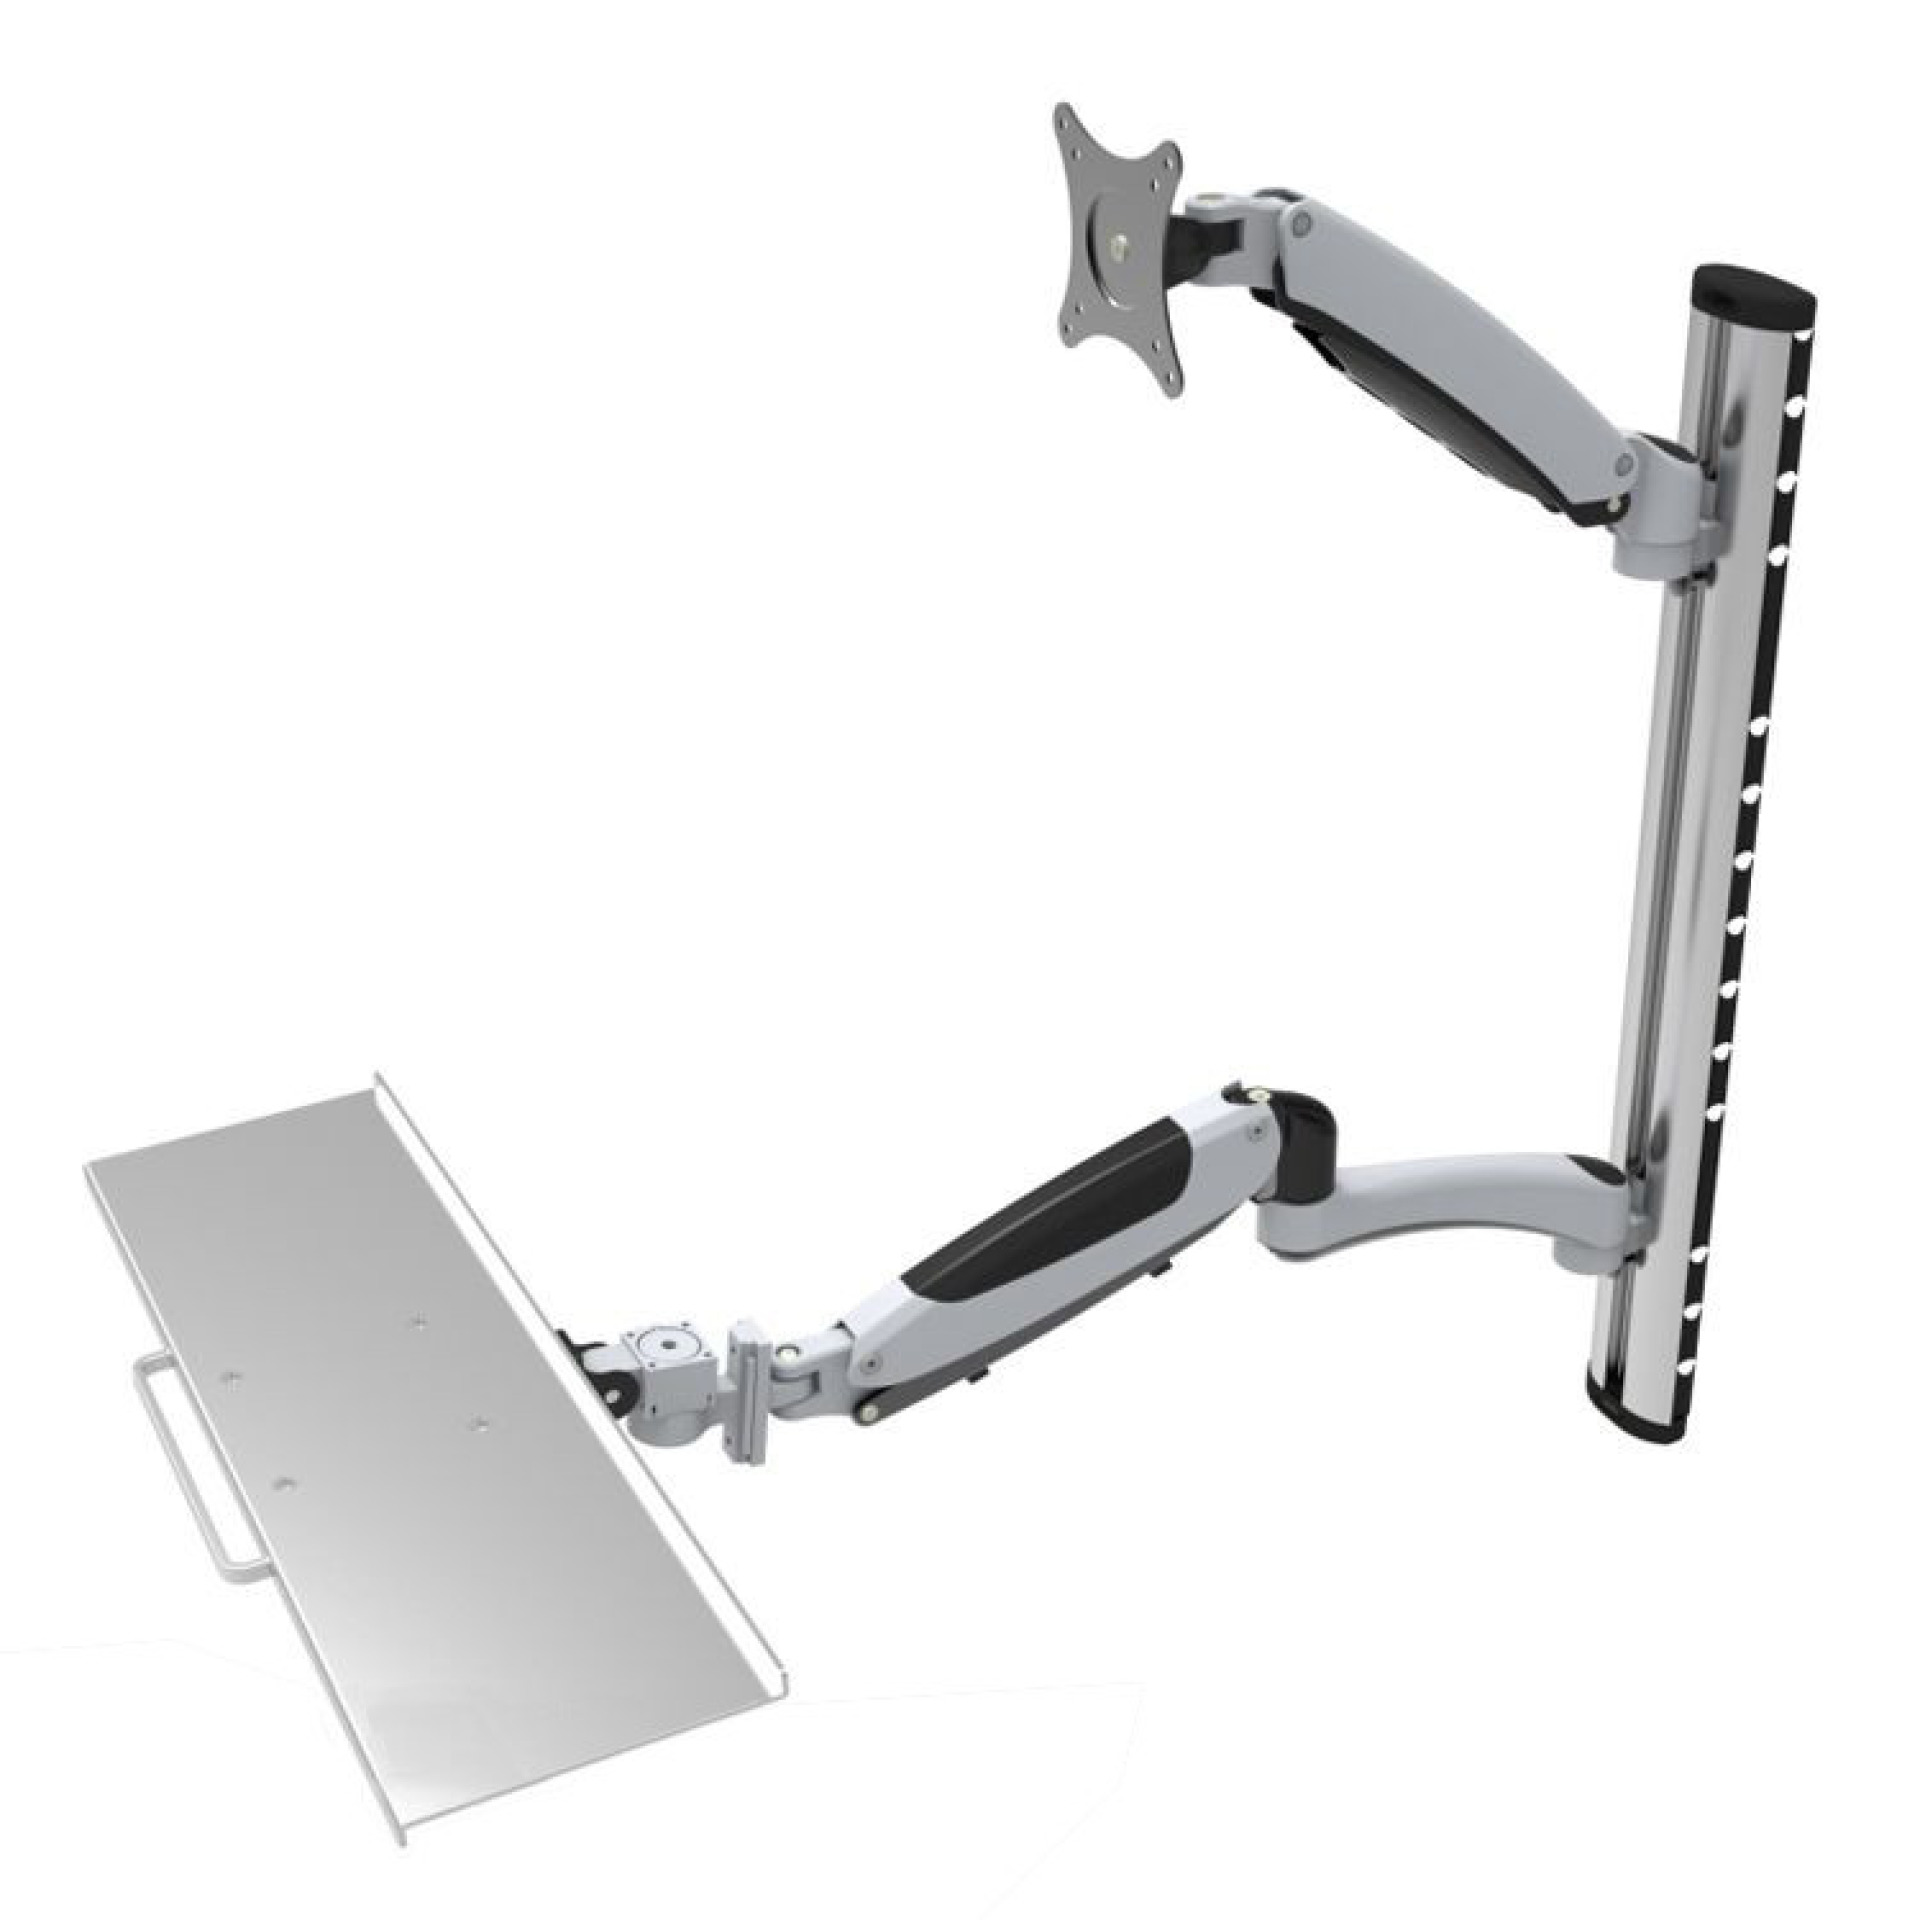 Wall bracket for 1 LCD 15"-27" adjustable shelf and LCD support